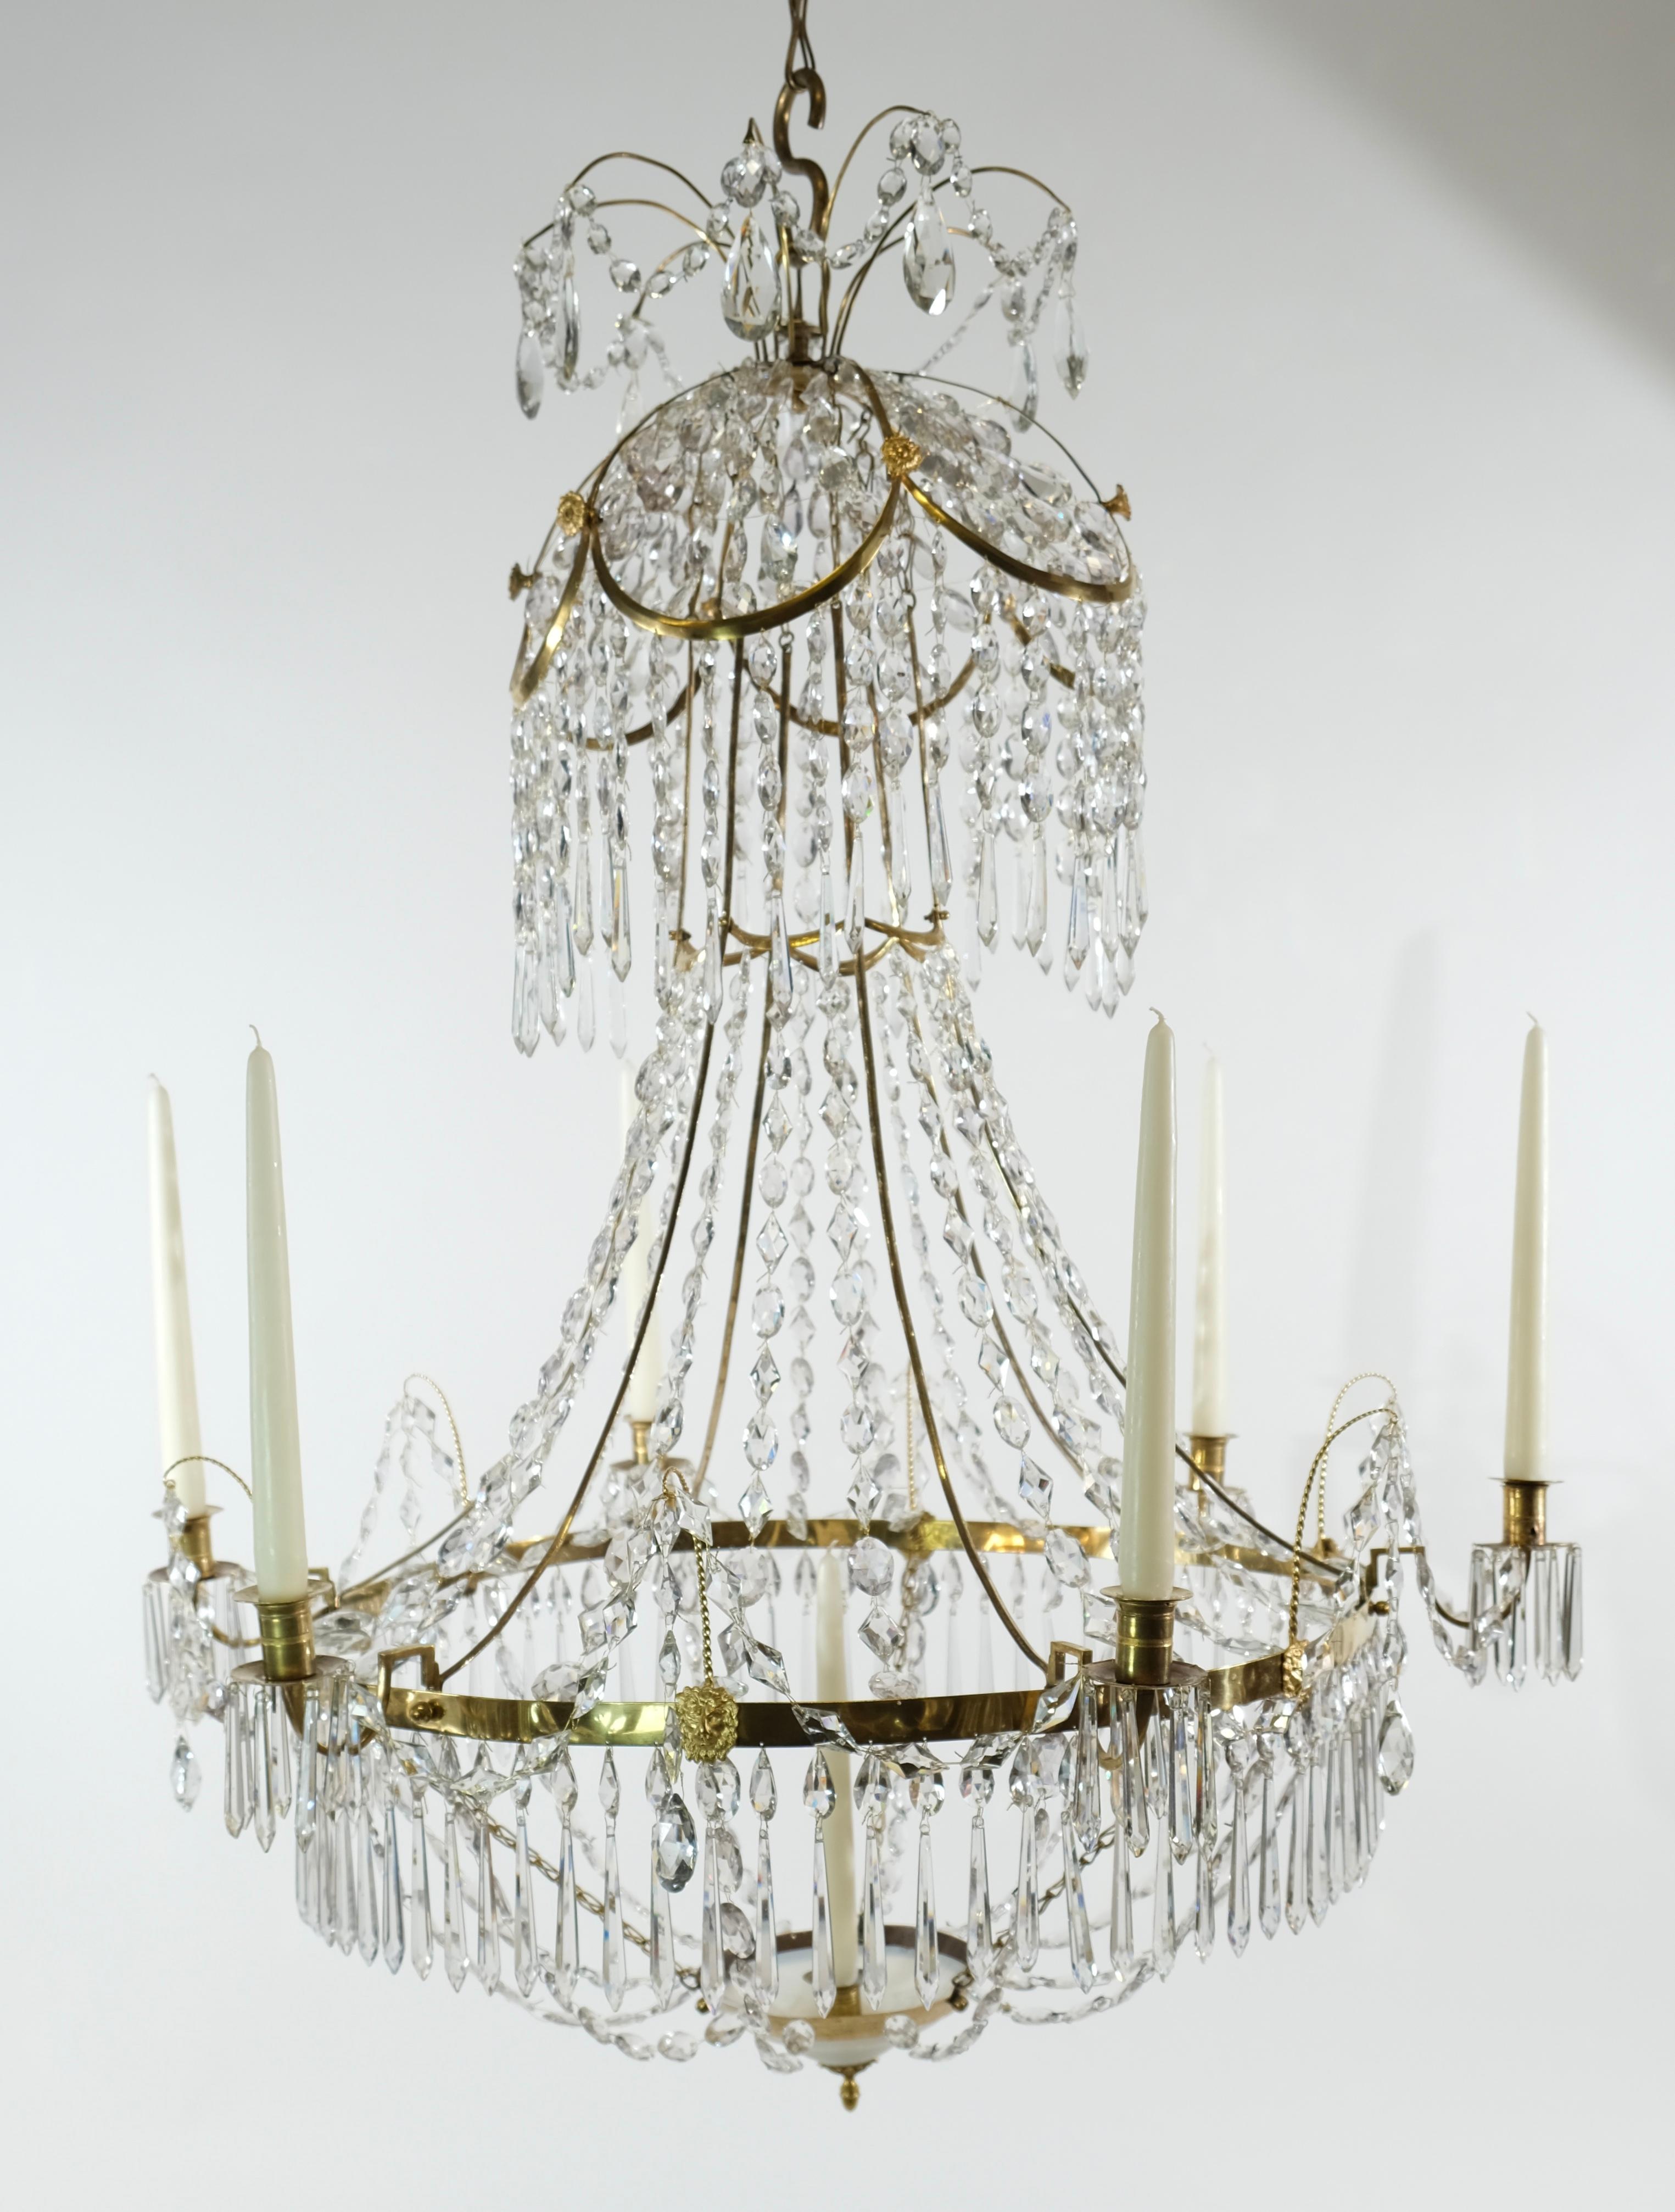 A Swedish Gustavian chandelier made around year 1810. It has six candleholders around the ring and one inside the white bowl at the chandeliers bottom. This was called the saving light. Candles were expensive in those days and usually you just lit